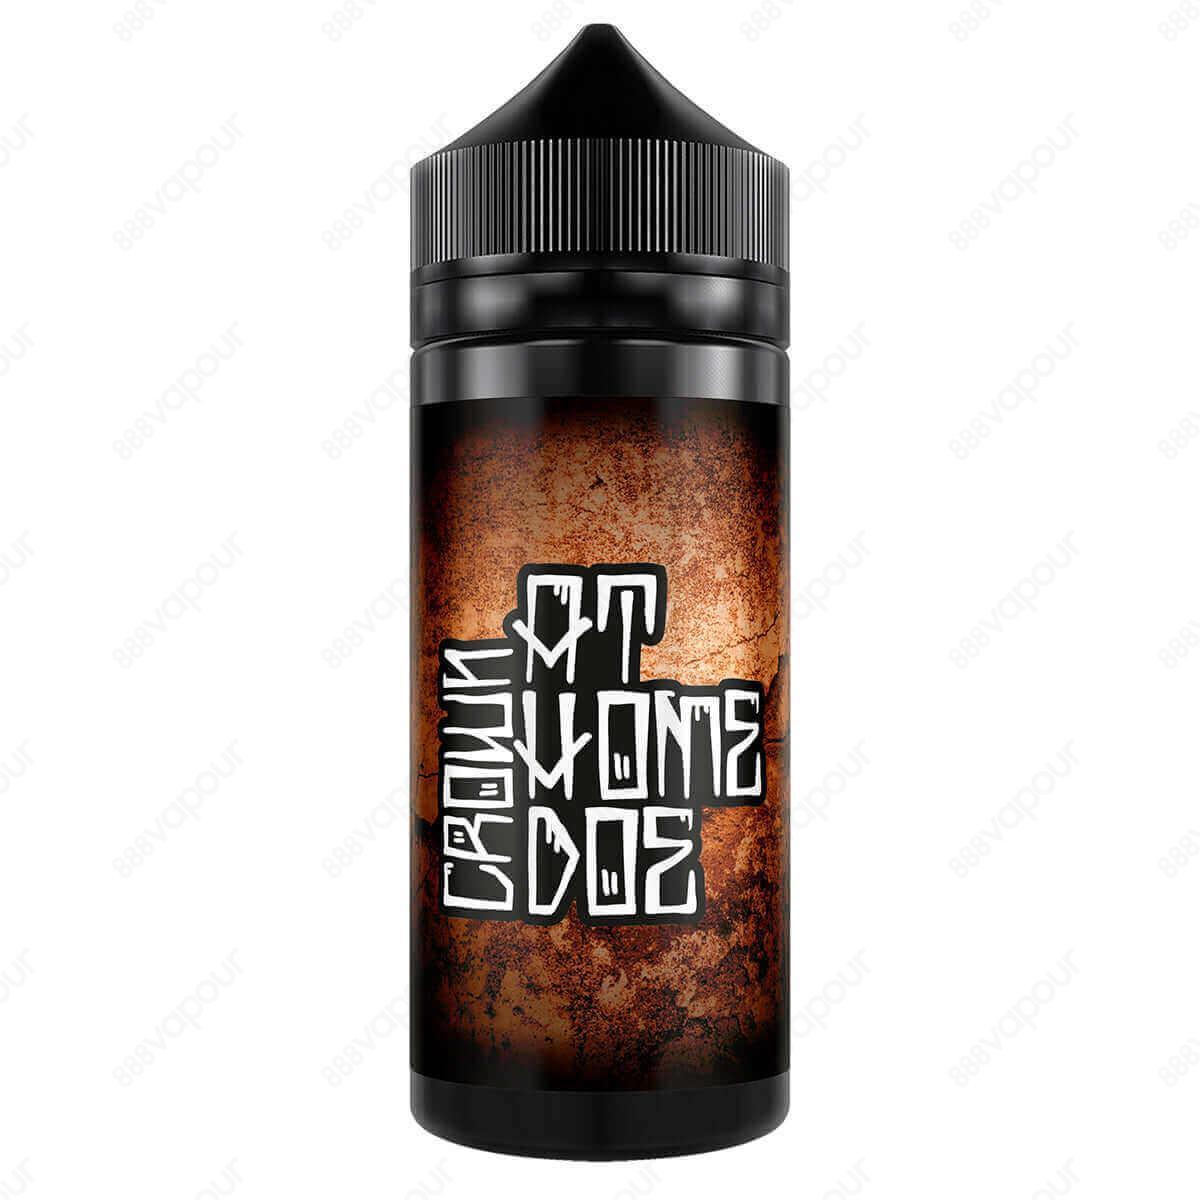 At Home Doe Crown E-Liquid | £11.99 | 888 Vapour | At Home Doe Crown e-liquid by The Yorkshire Vaper is a sweet citrus orange candy flavour, sure to keep you on your toes for days! Crown is available in a 100ml 0mg shortfill, with space to add two 10ml 18